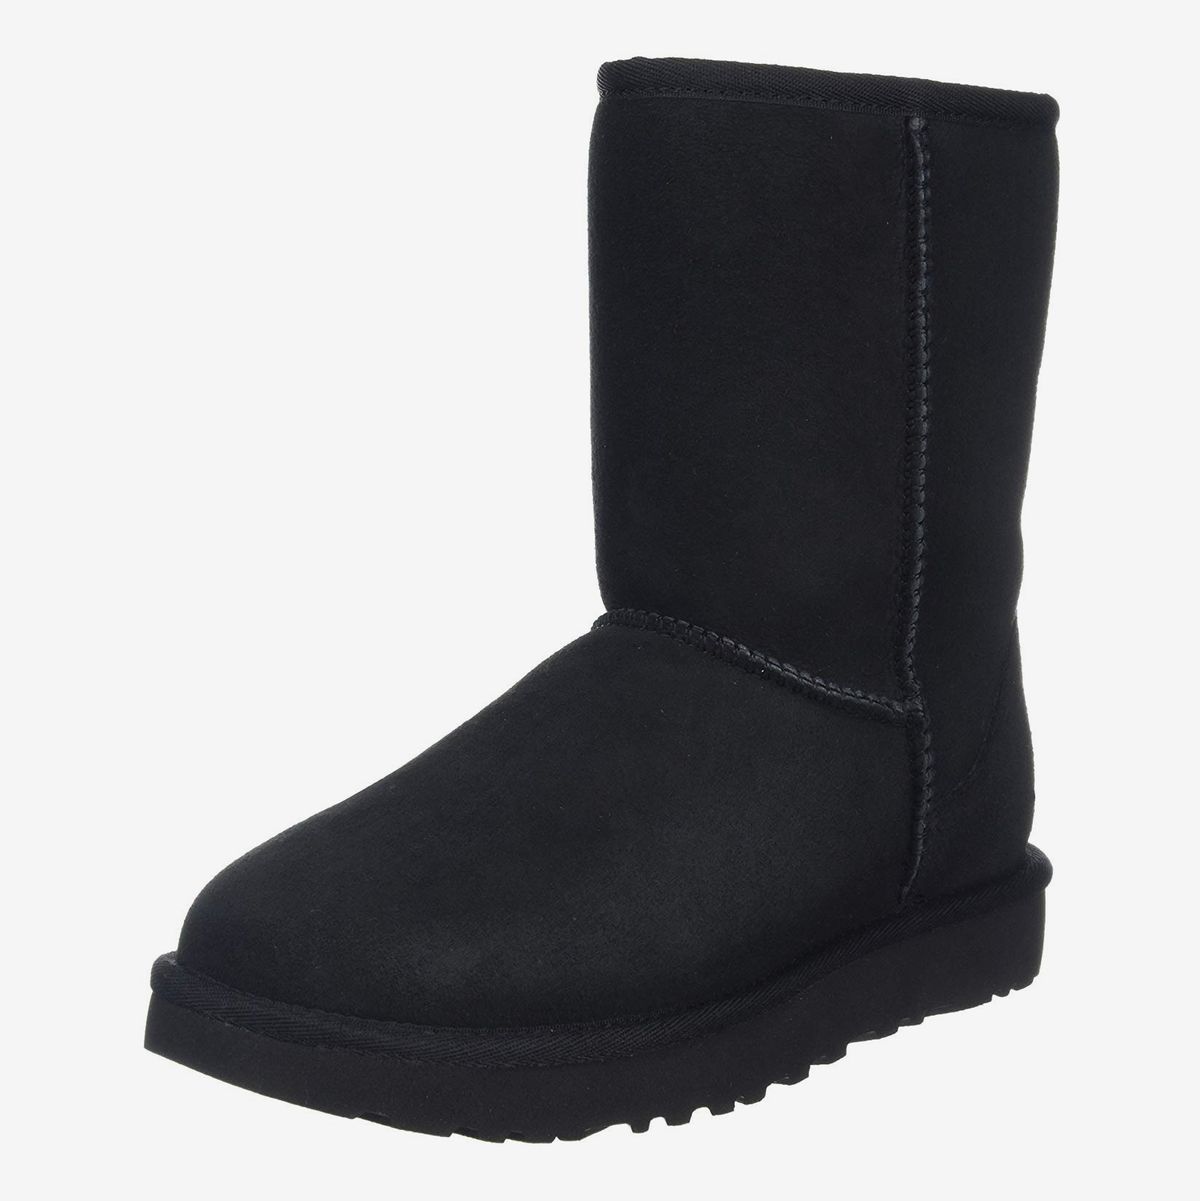 ugg women's snow boots on sale